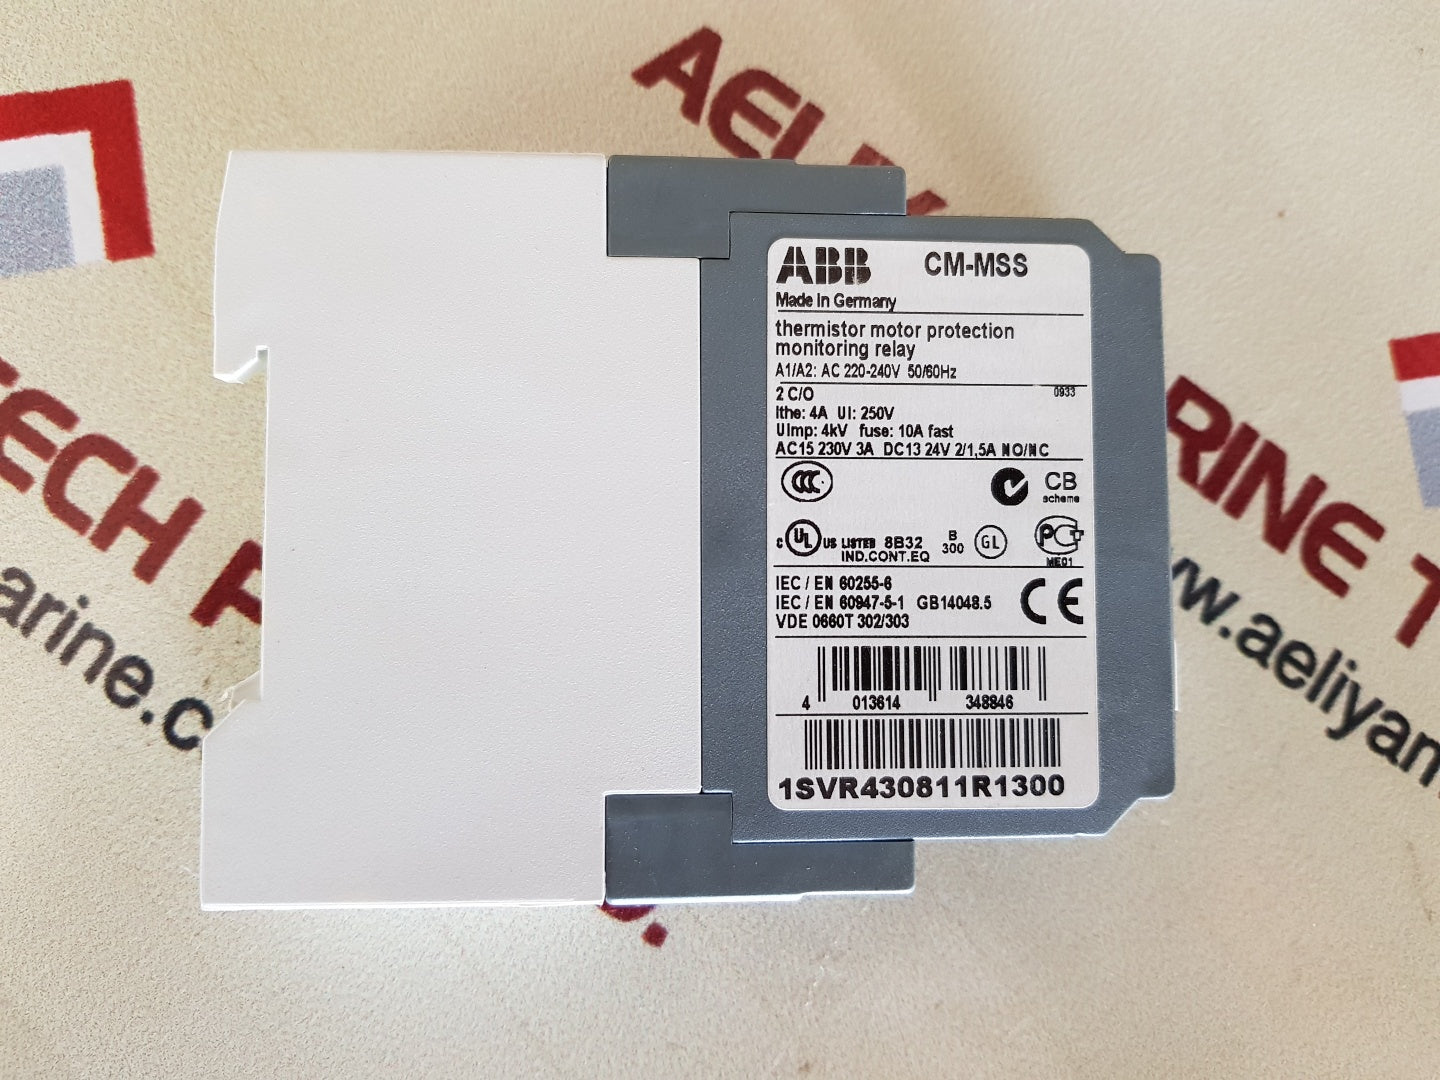 Abb cm-mss 1svr430811r1300 thermistor motor protection monitoring relay